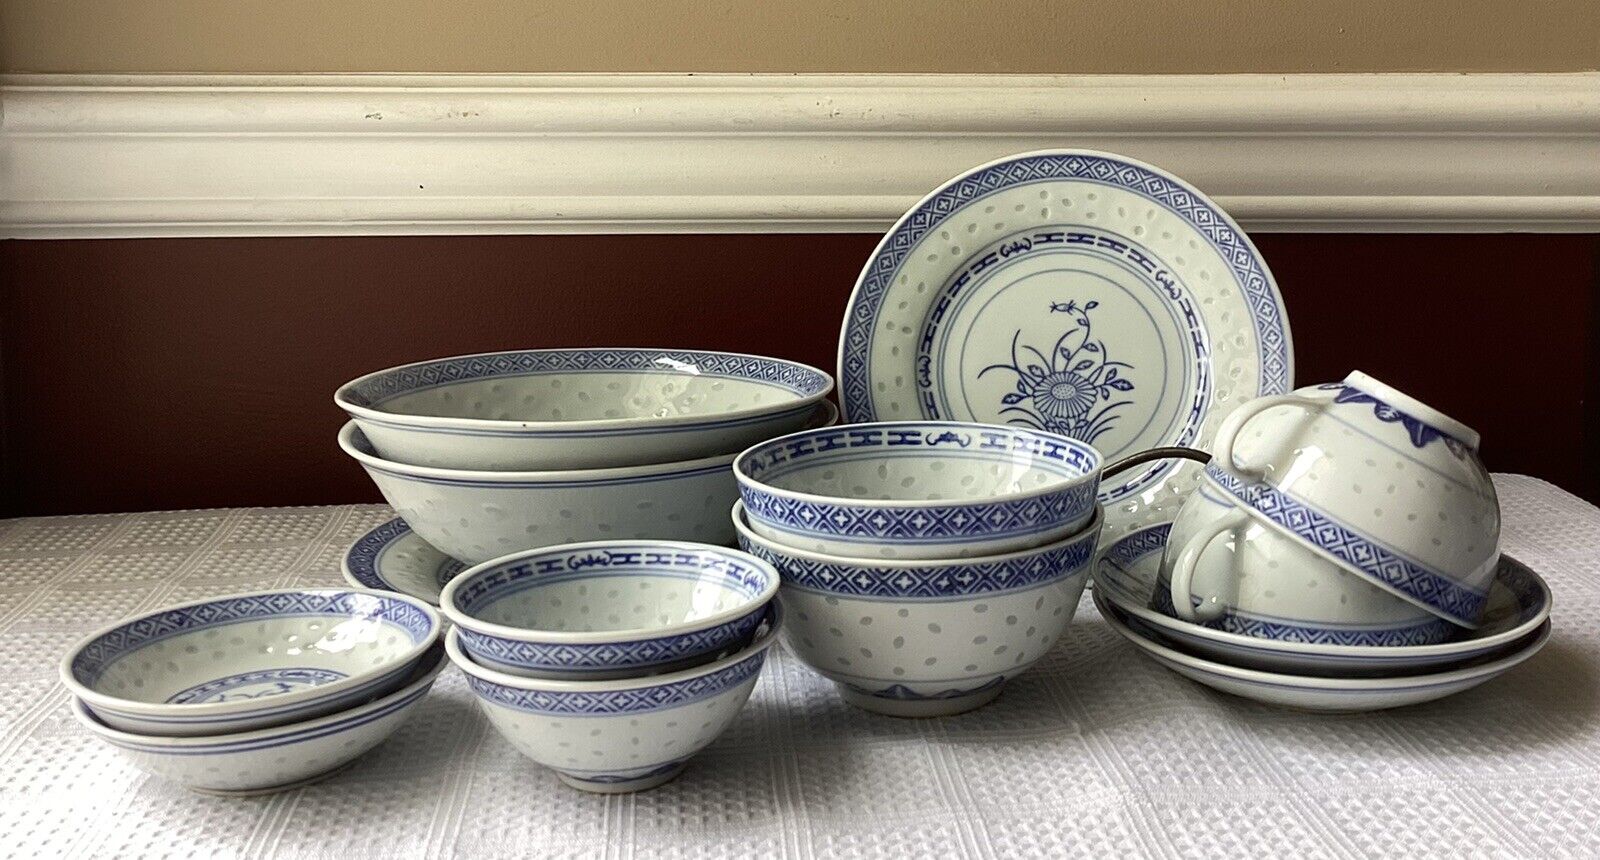 Set of 14-piece Vintage Chinese Porcelain Rice Eye Dinner Service For 2